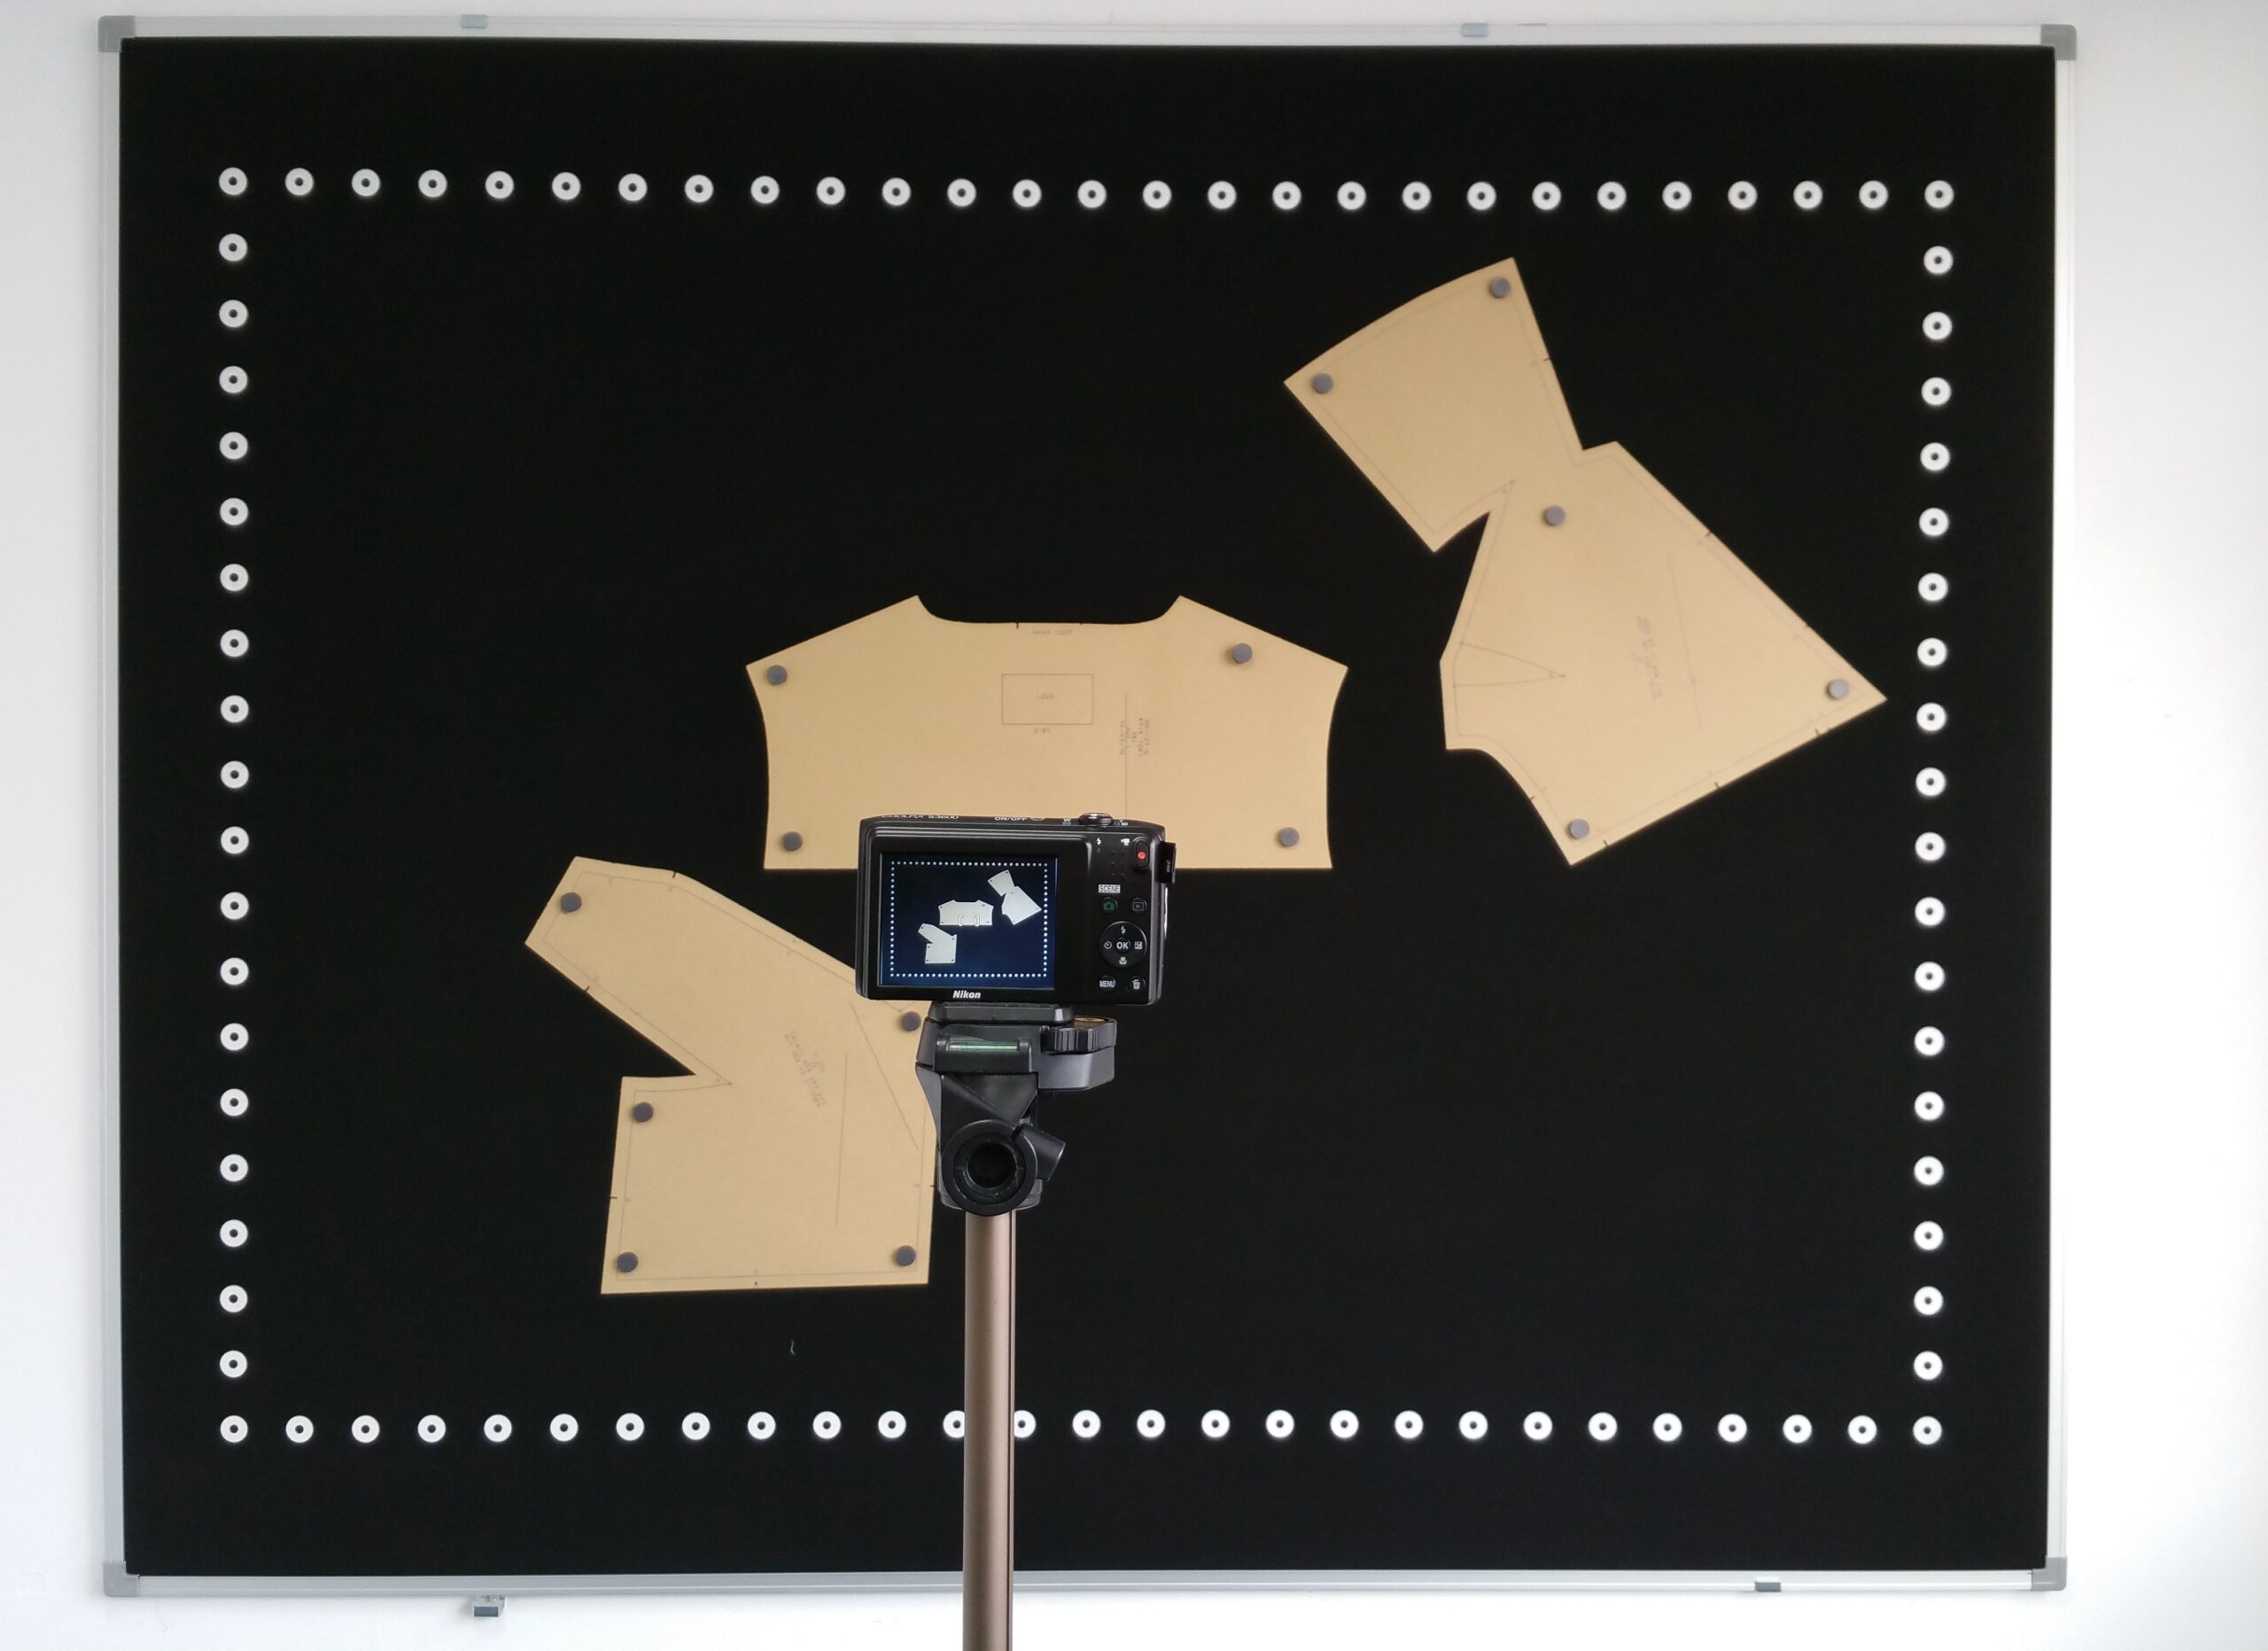 Photo digitising board and camera with patterns being digitised